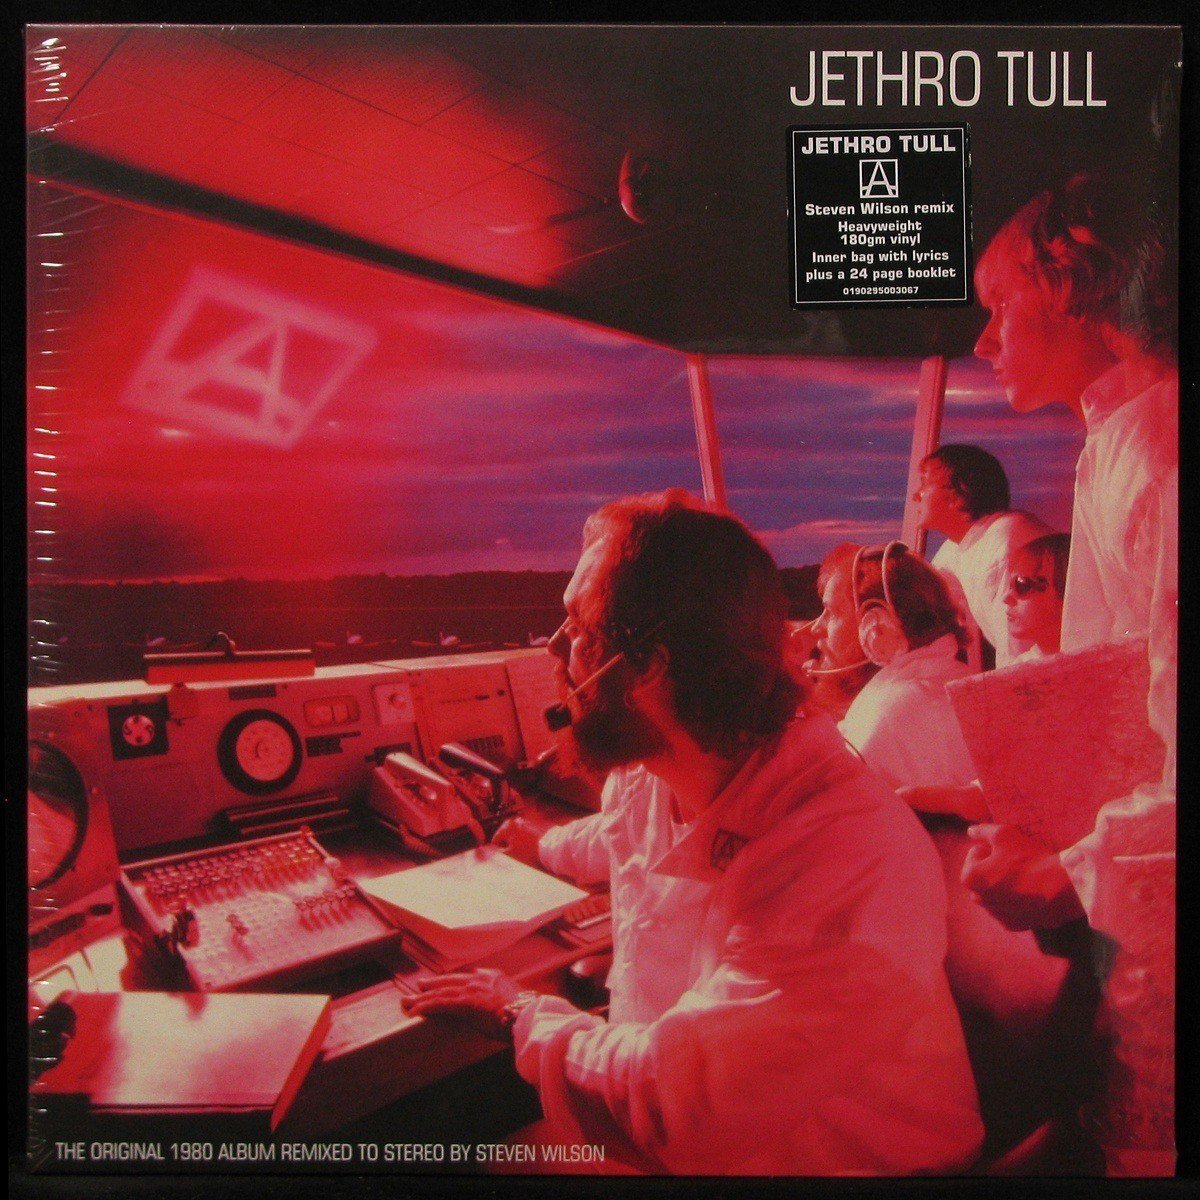 LP Jethro Tull — A (+ booklet) фото